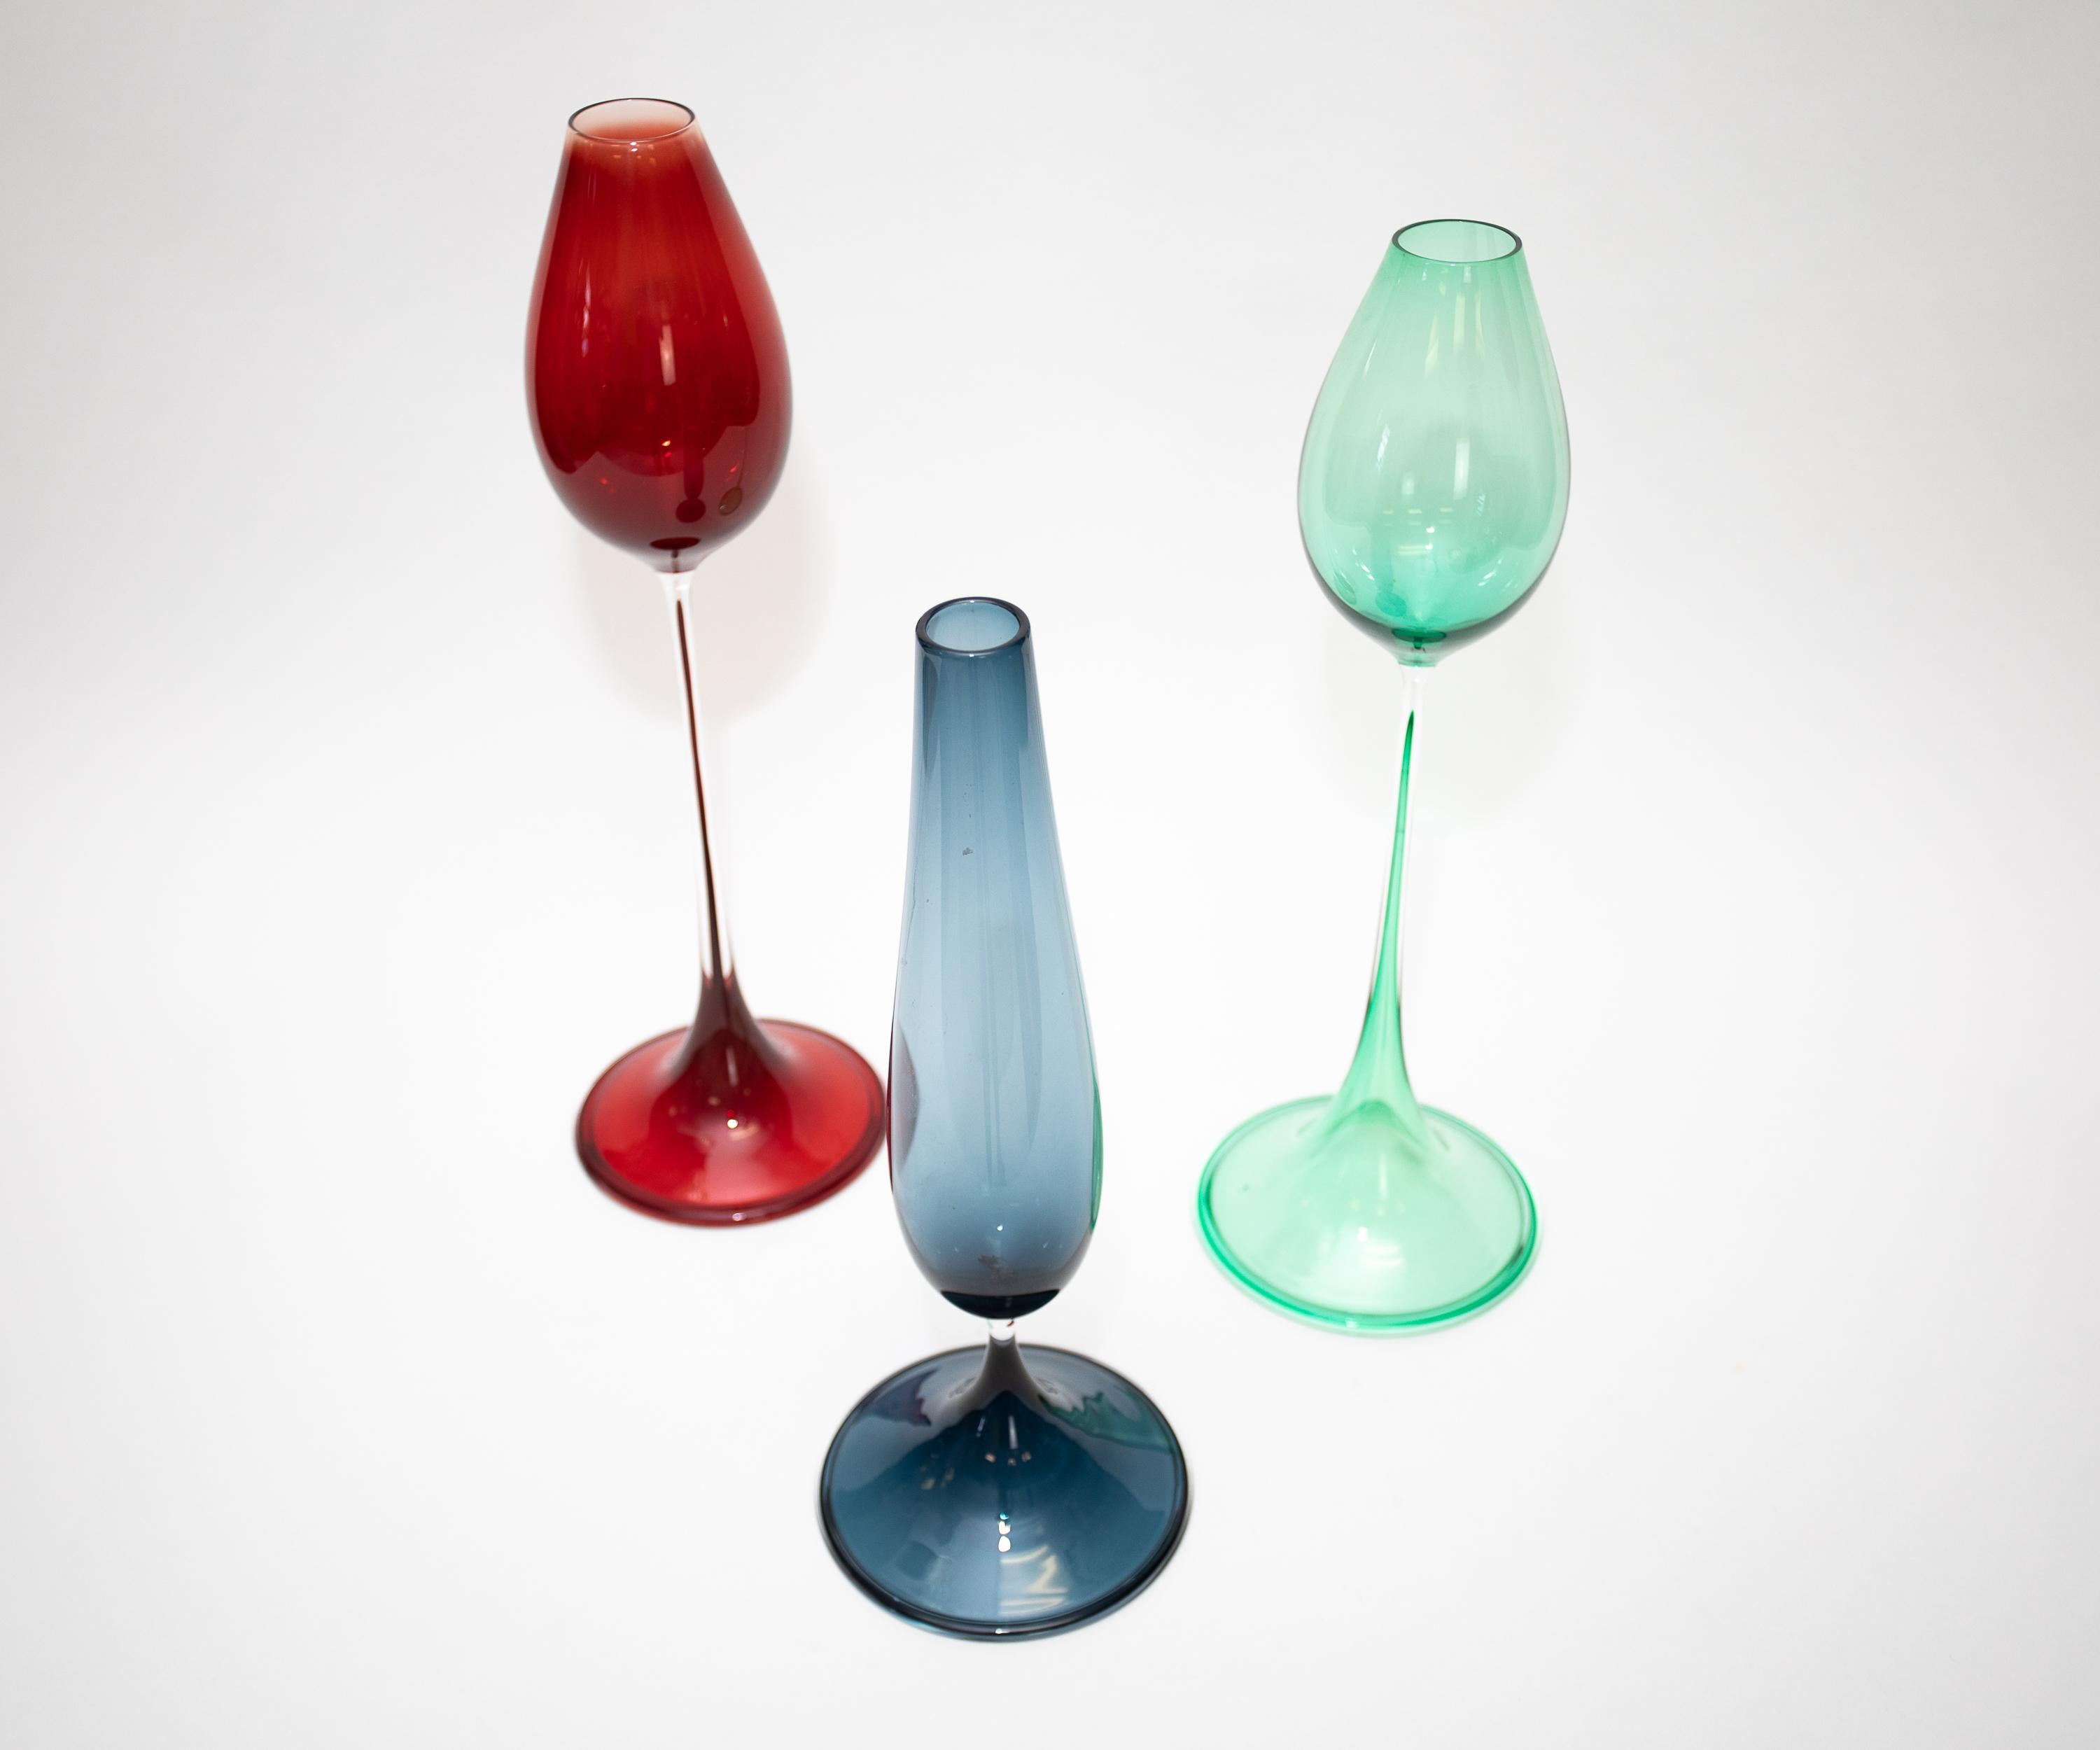 3 Tulip Glasses
Designed by Nils Landberg and mouth blown at Orrefors.
First exhibited at the 1957 Milan Triennale .
A difficult  and elegant masterpiece .
2 @ 17